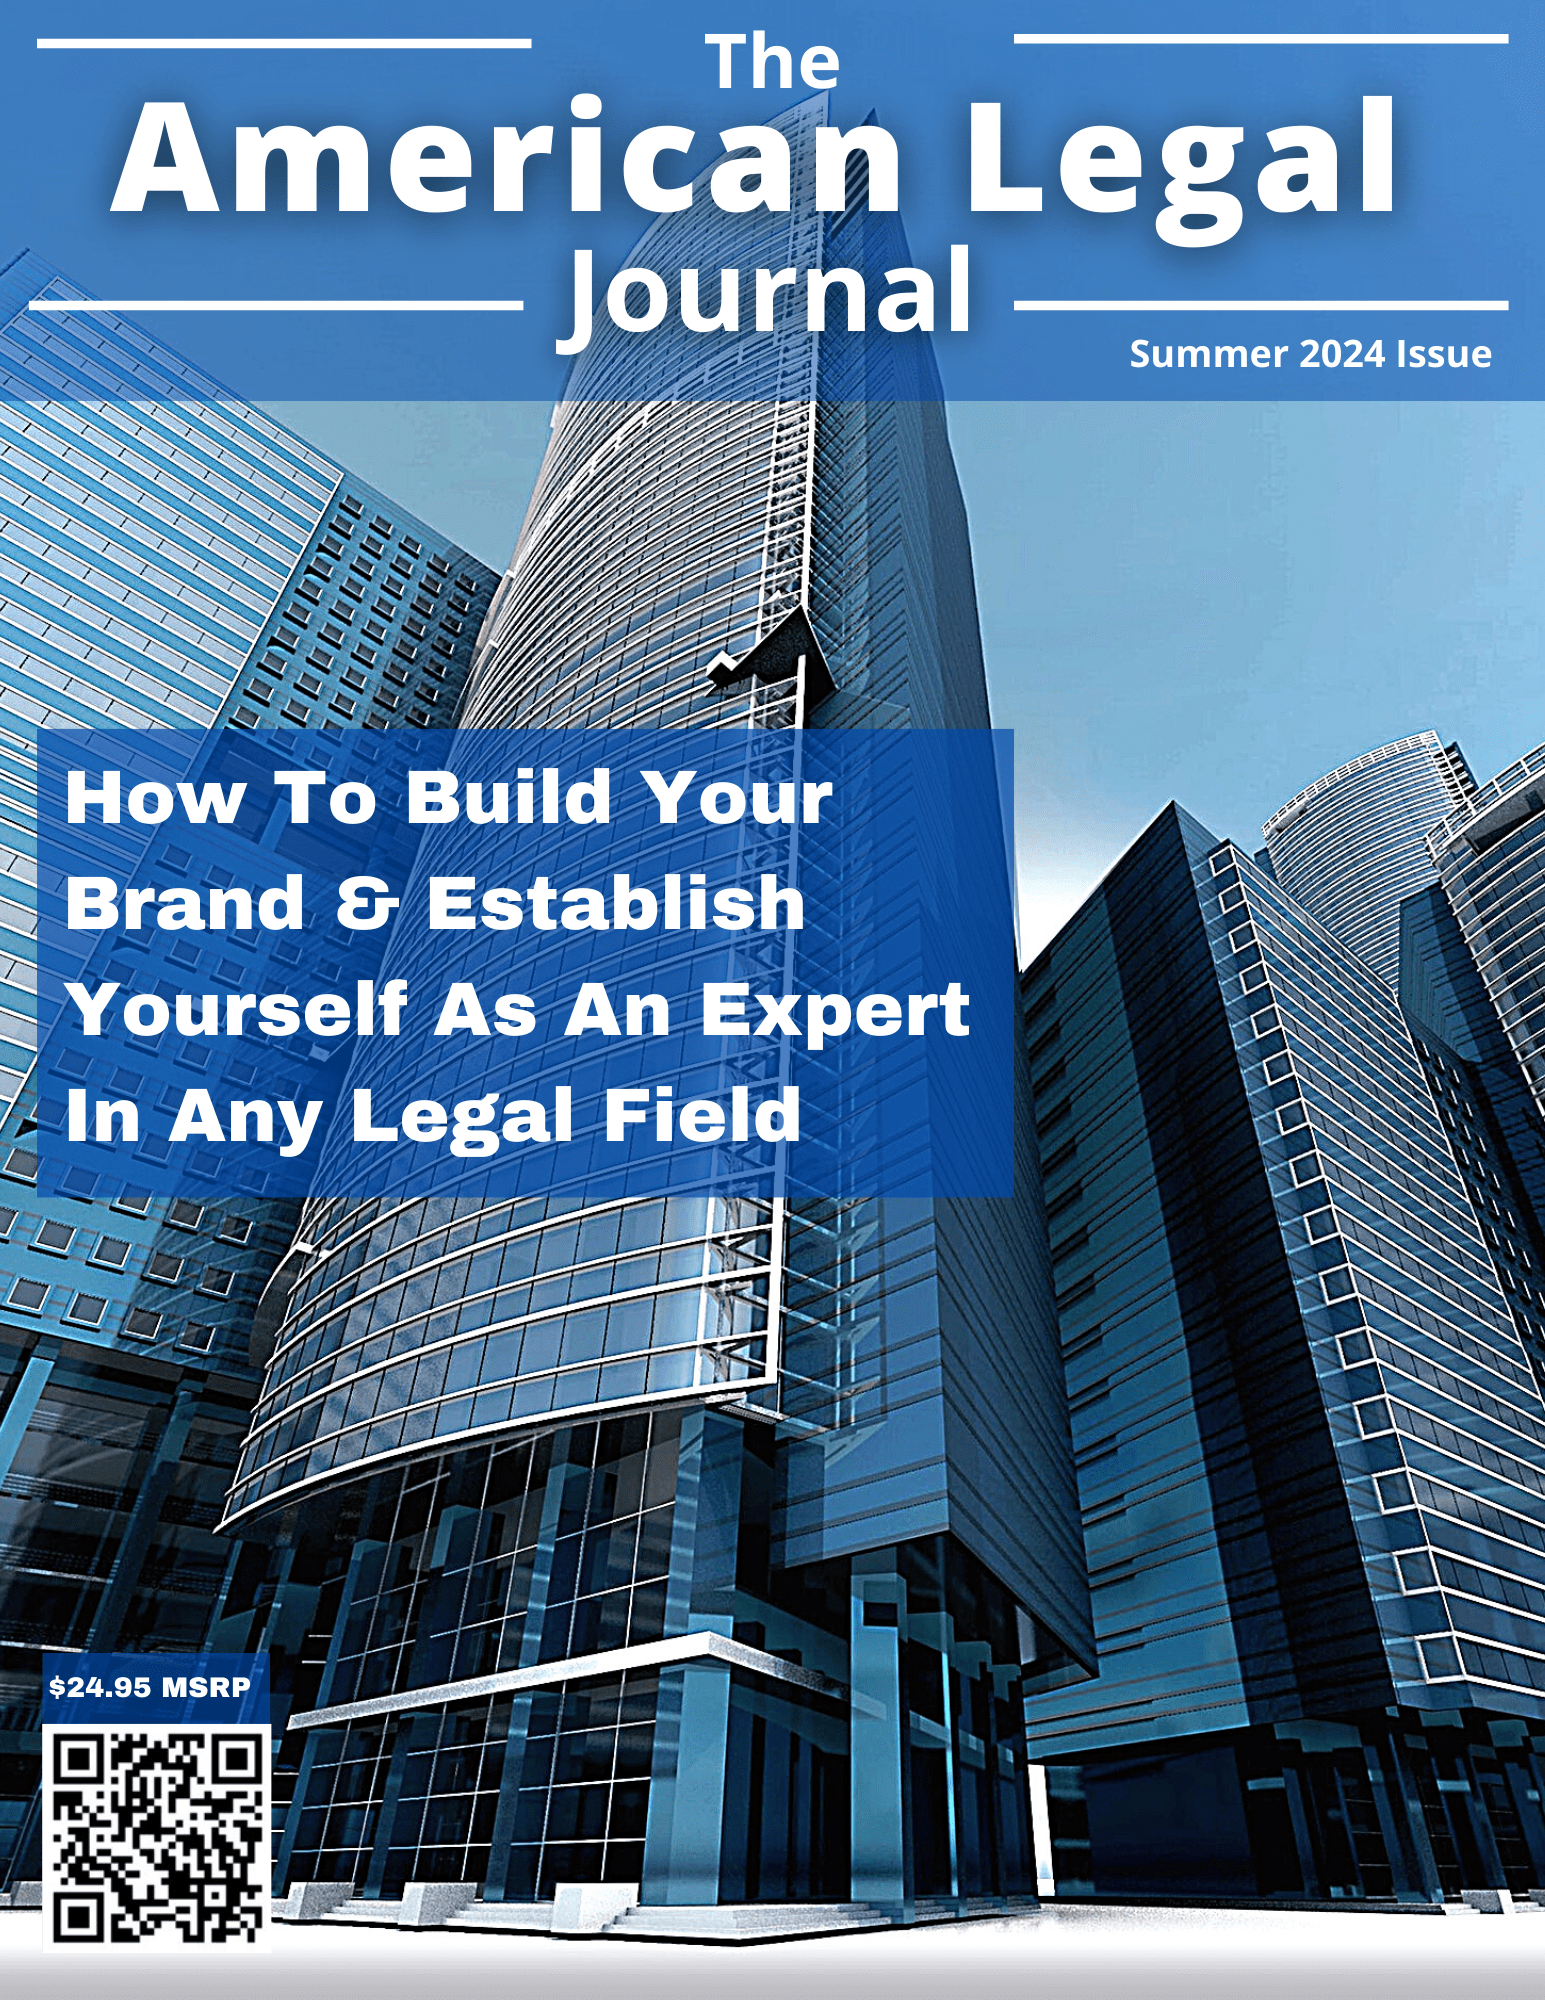 The American Legal Journal